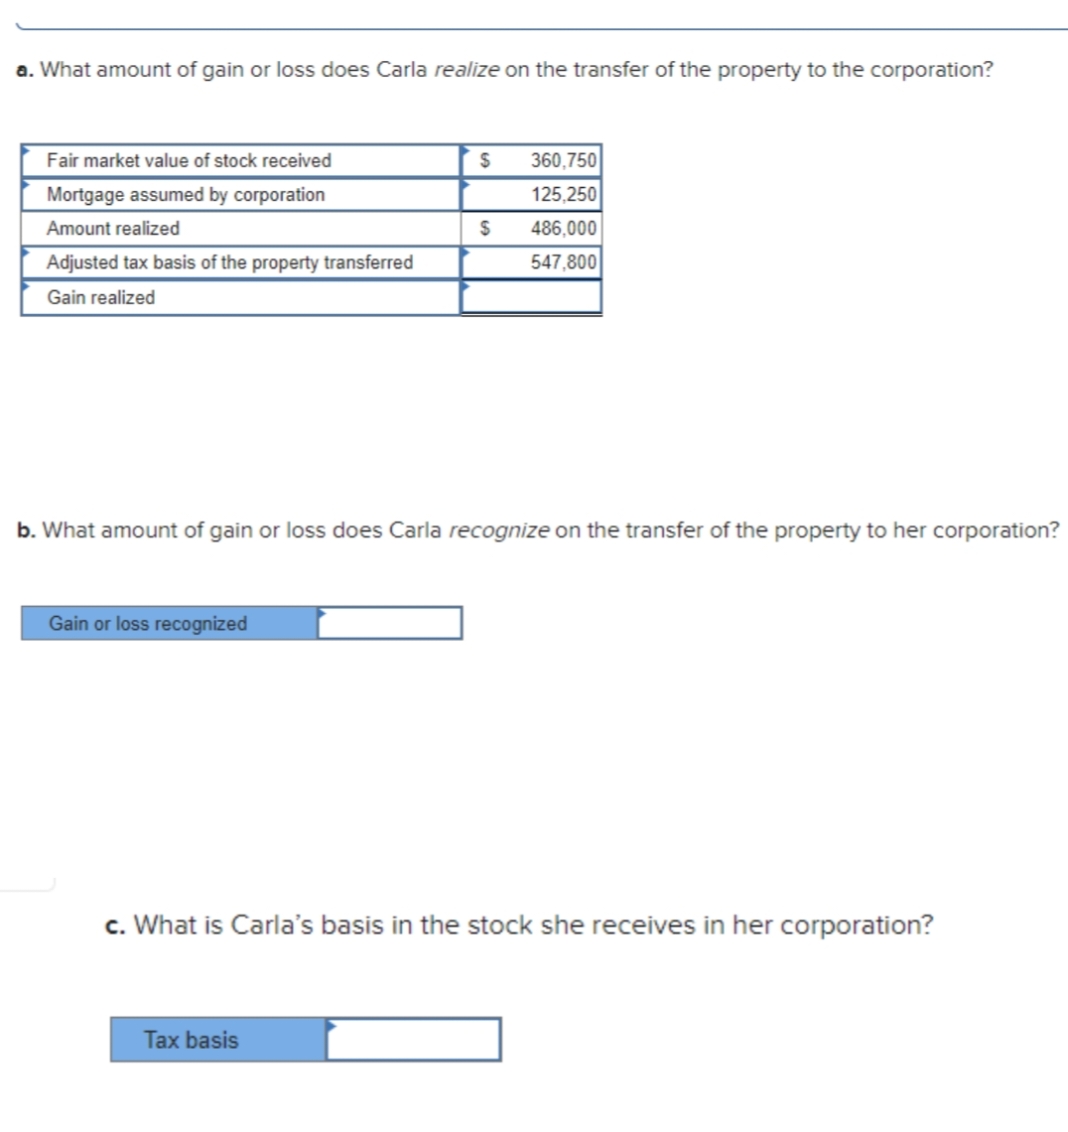 a. What amount of gain or loss does Carla realize on the transfer of the property to the corporation?
Fair market value of stock received
360,750
Mortgage assumed by corporation
125,250
Amount realized
486,000
Adjusted tax basis of the property transferred
547,800
Gain realized
b. What amount of gain or loss does Carla recognize on the transfer of the property to her corporation?
Gain or loss recognized
c. What is Carla's basis in the stock she receives in her corporation?
Tax basis
